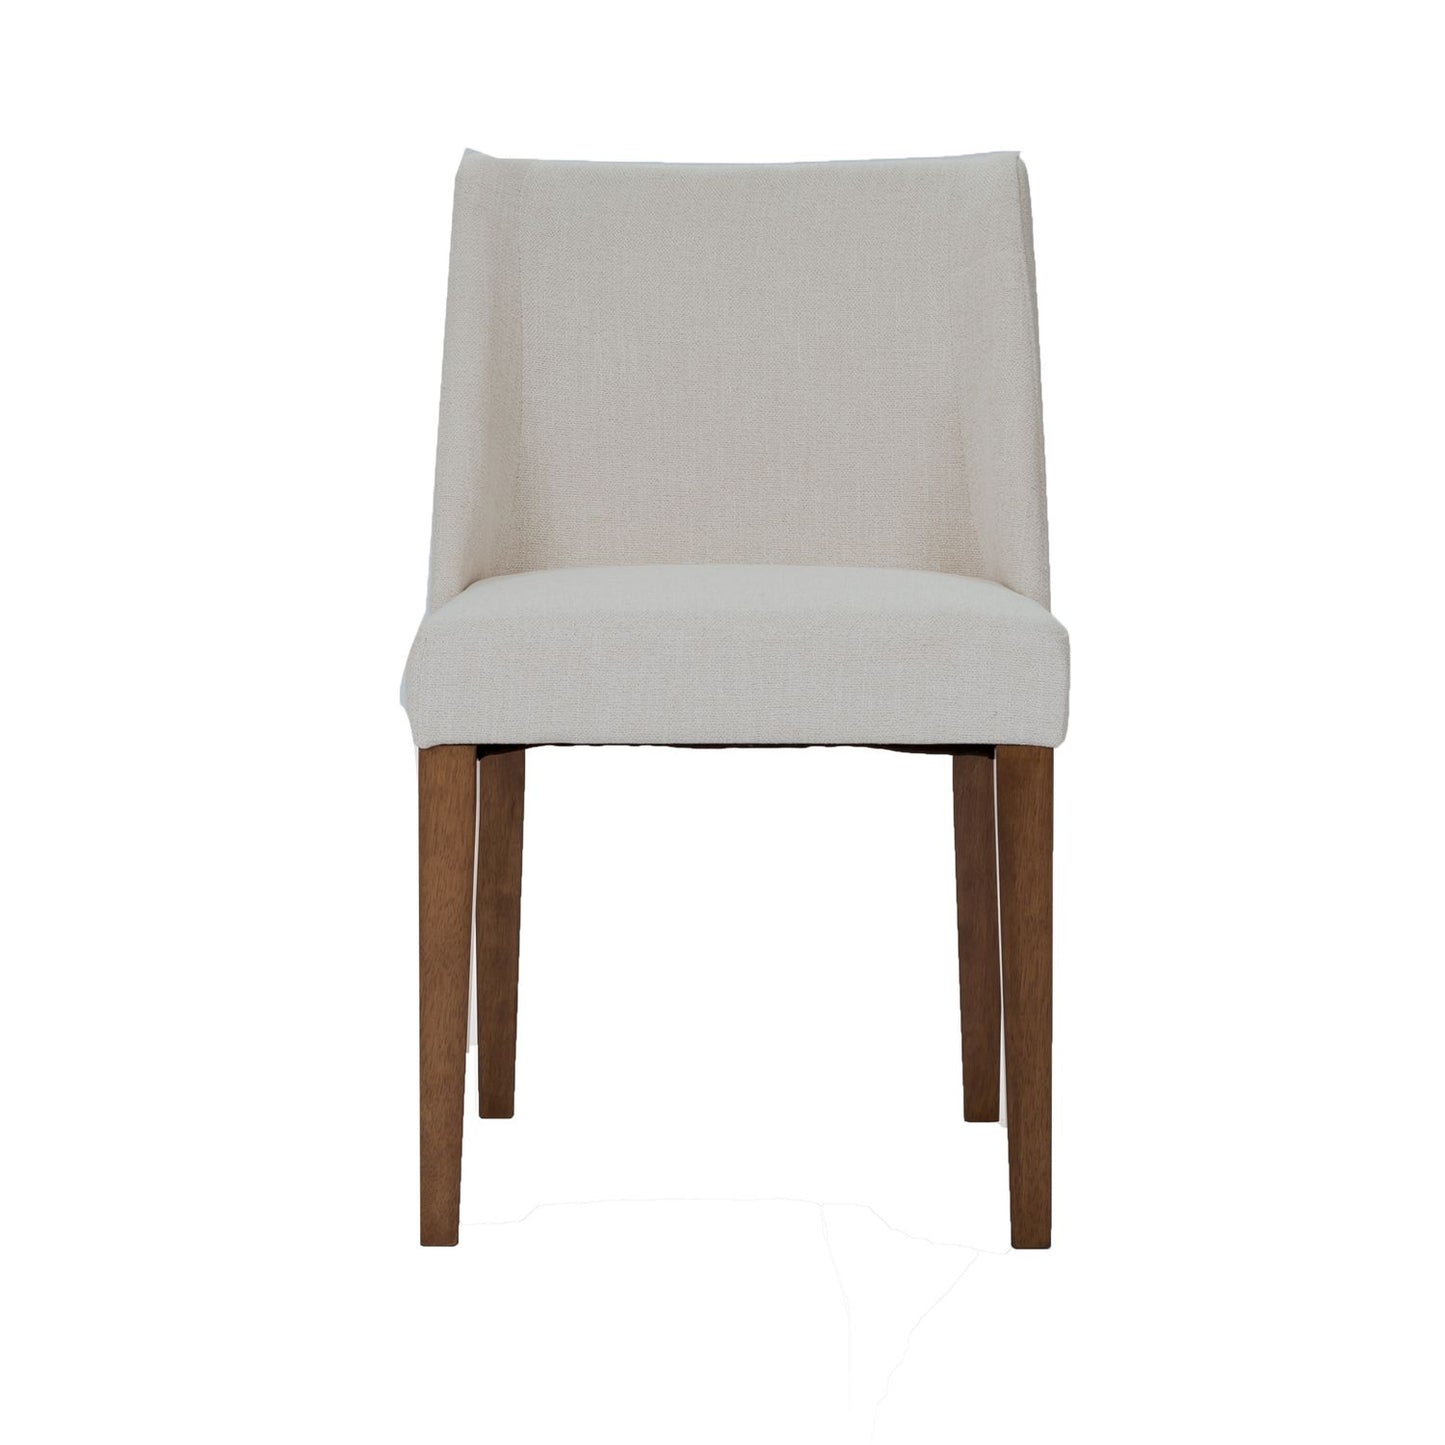 Space Savers Group Nido Dining Or Accent Chair Light Tan